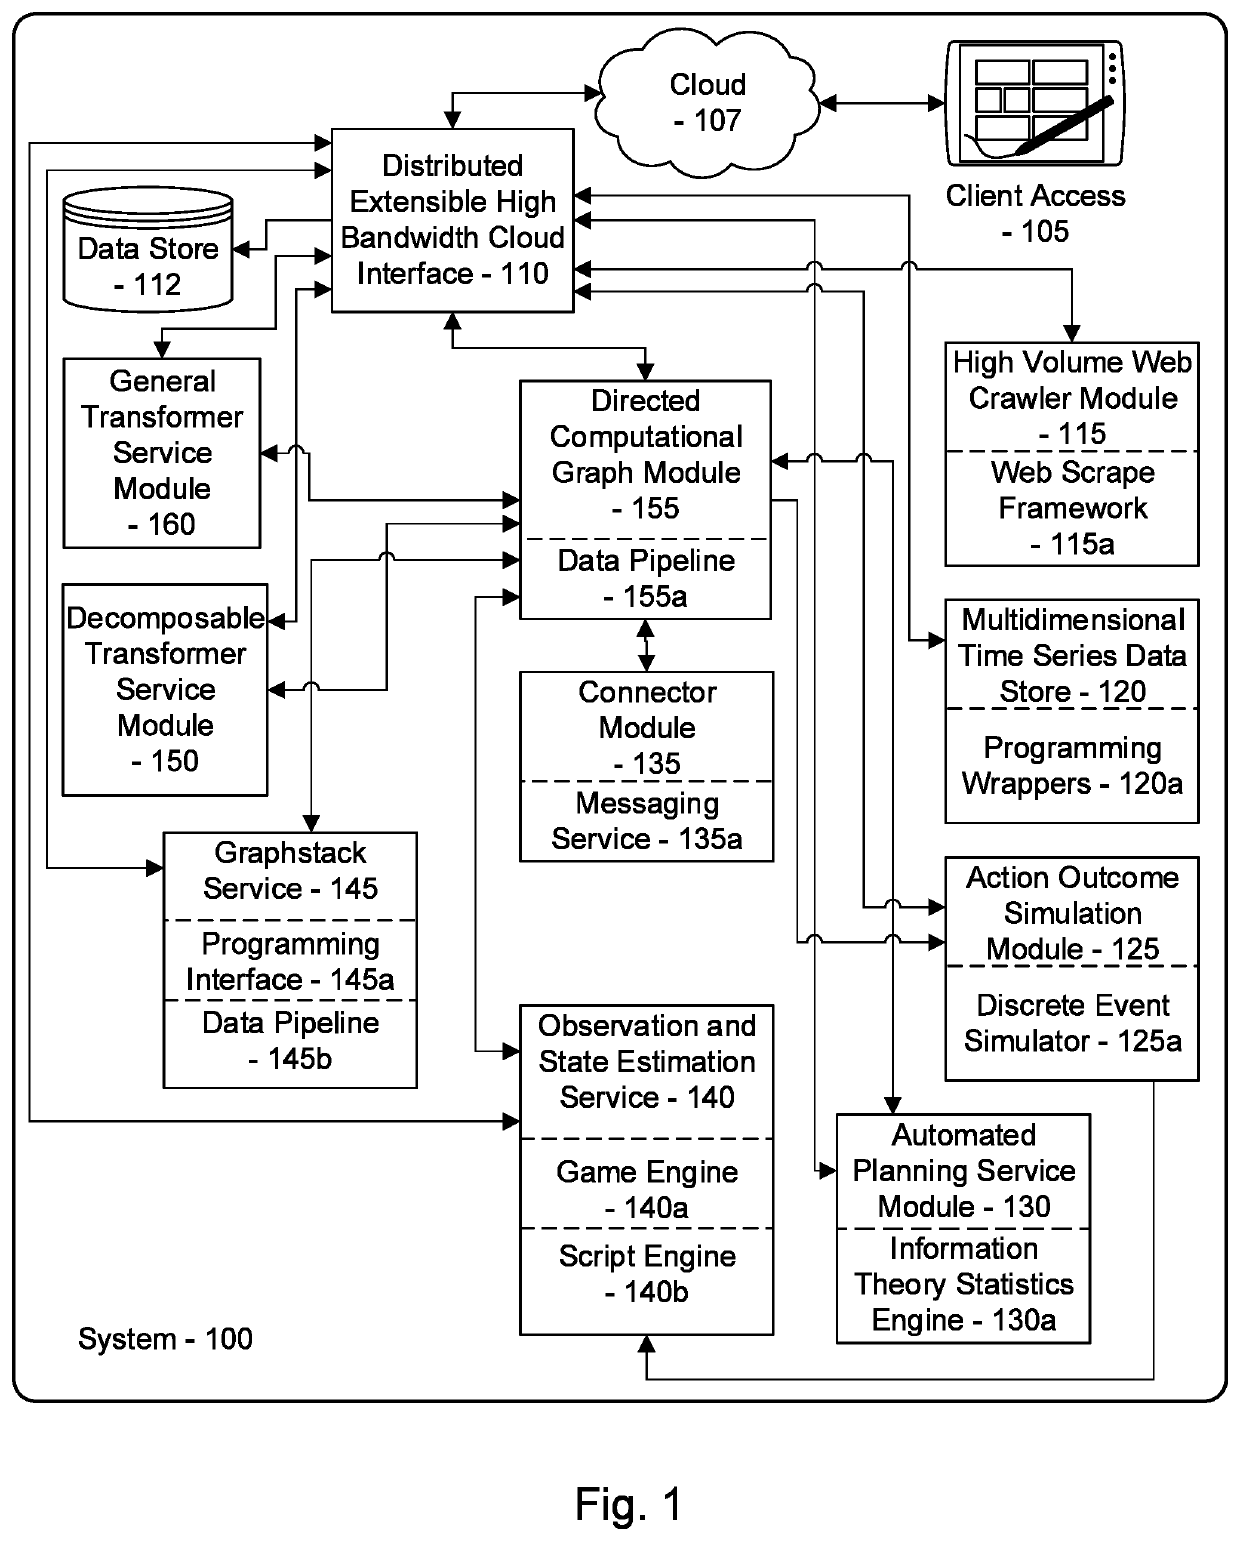 Parametric analysis of integrated operational technology systems and information technology systems